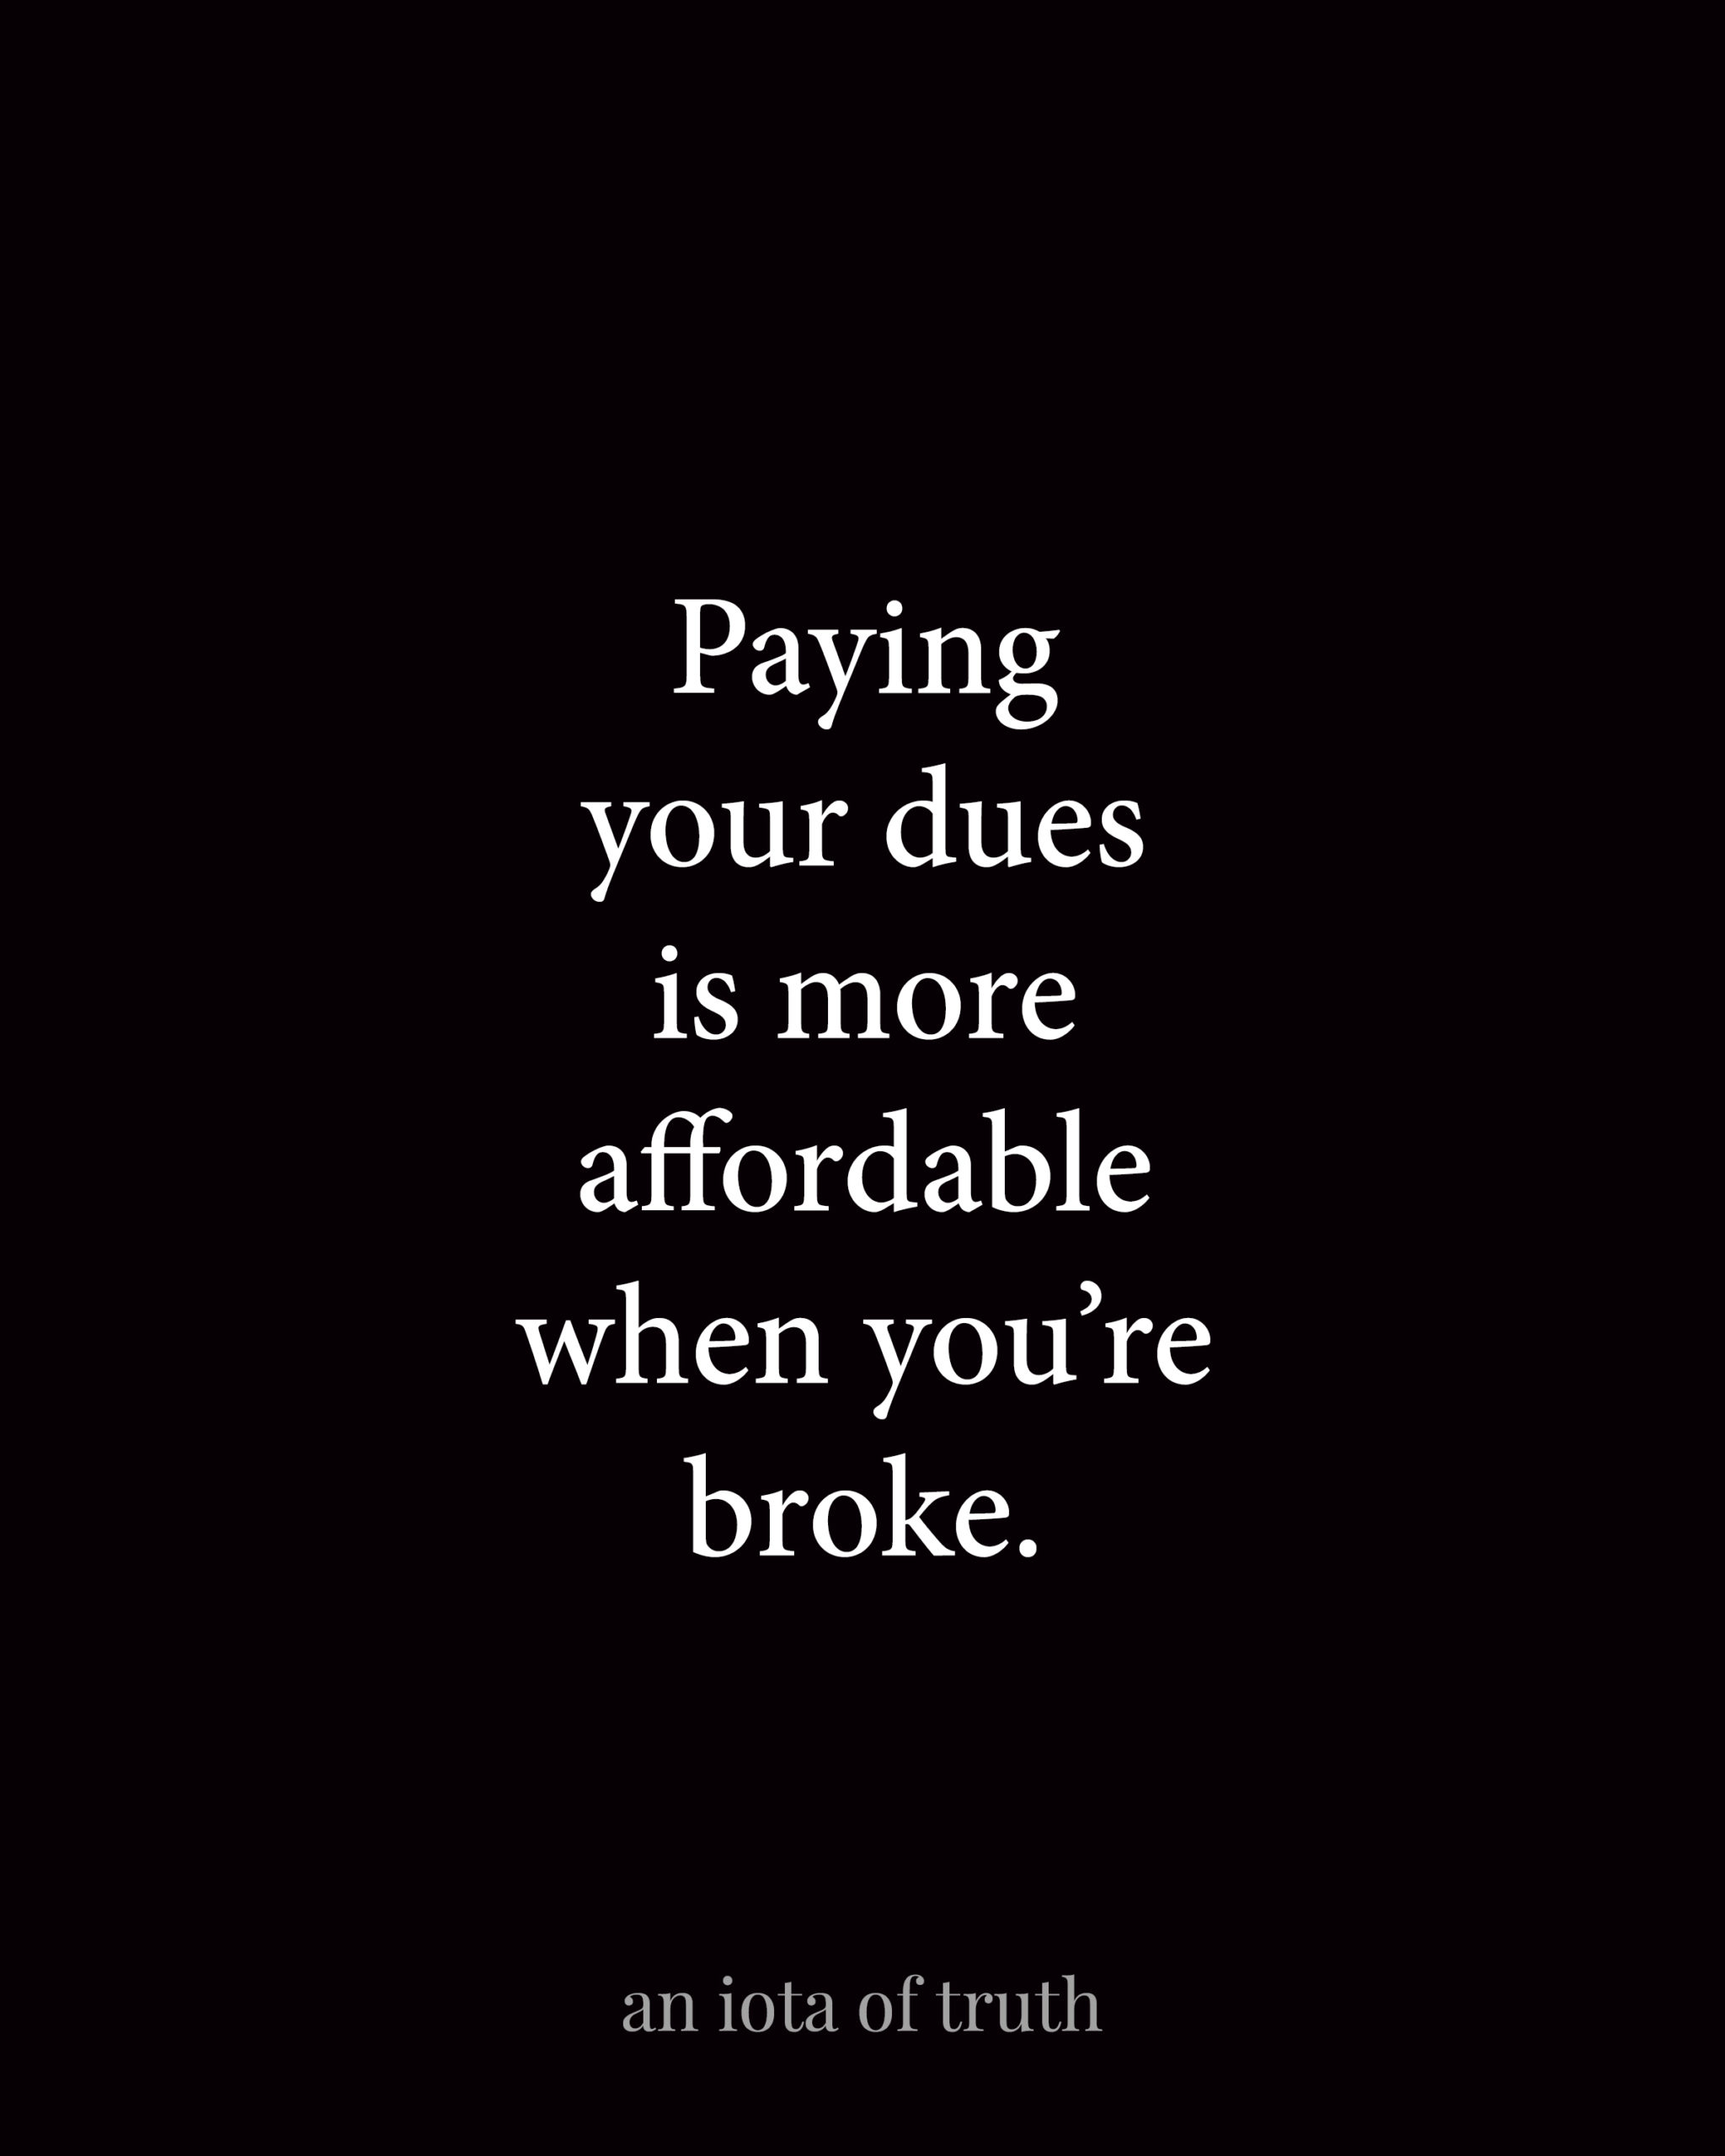 Paying your dues is more affordable when you are broke.